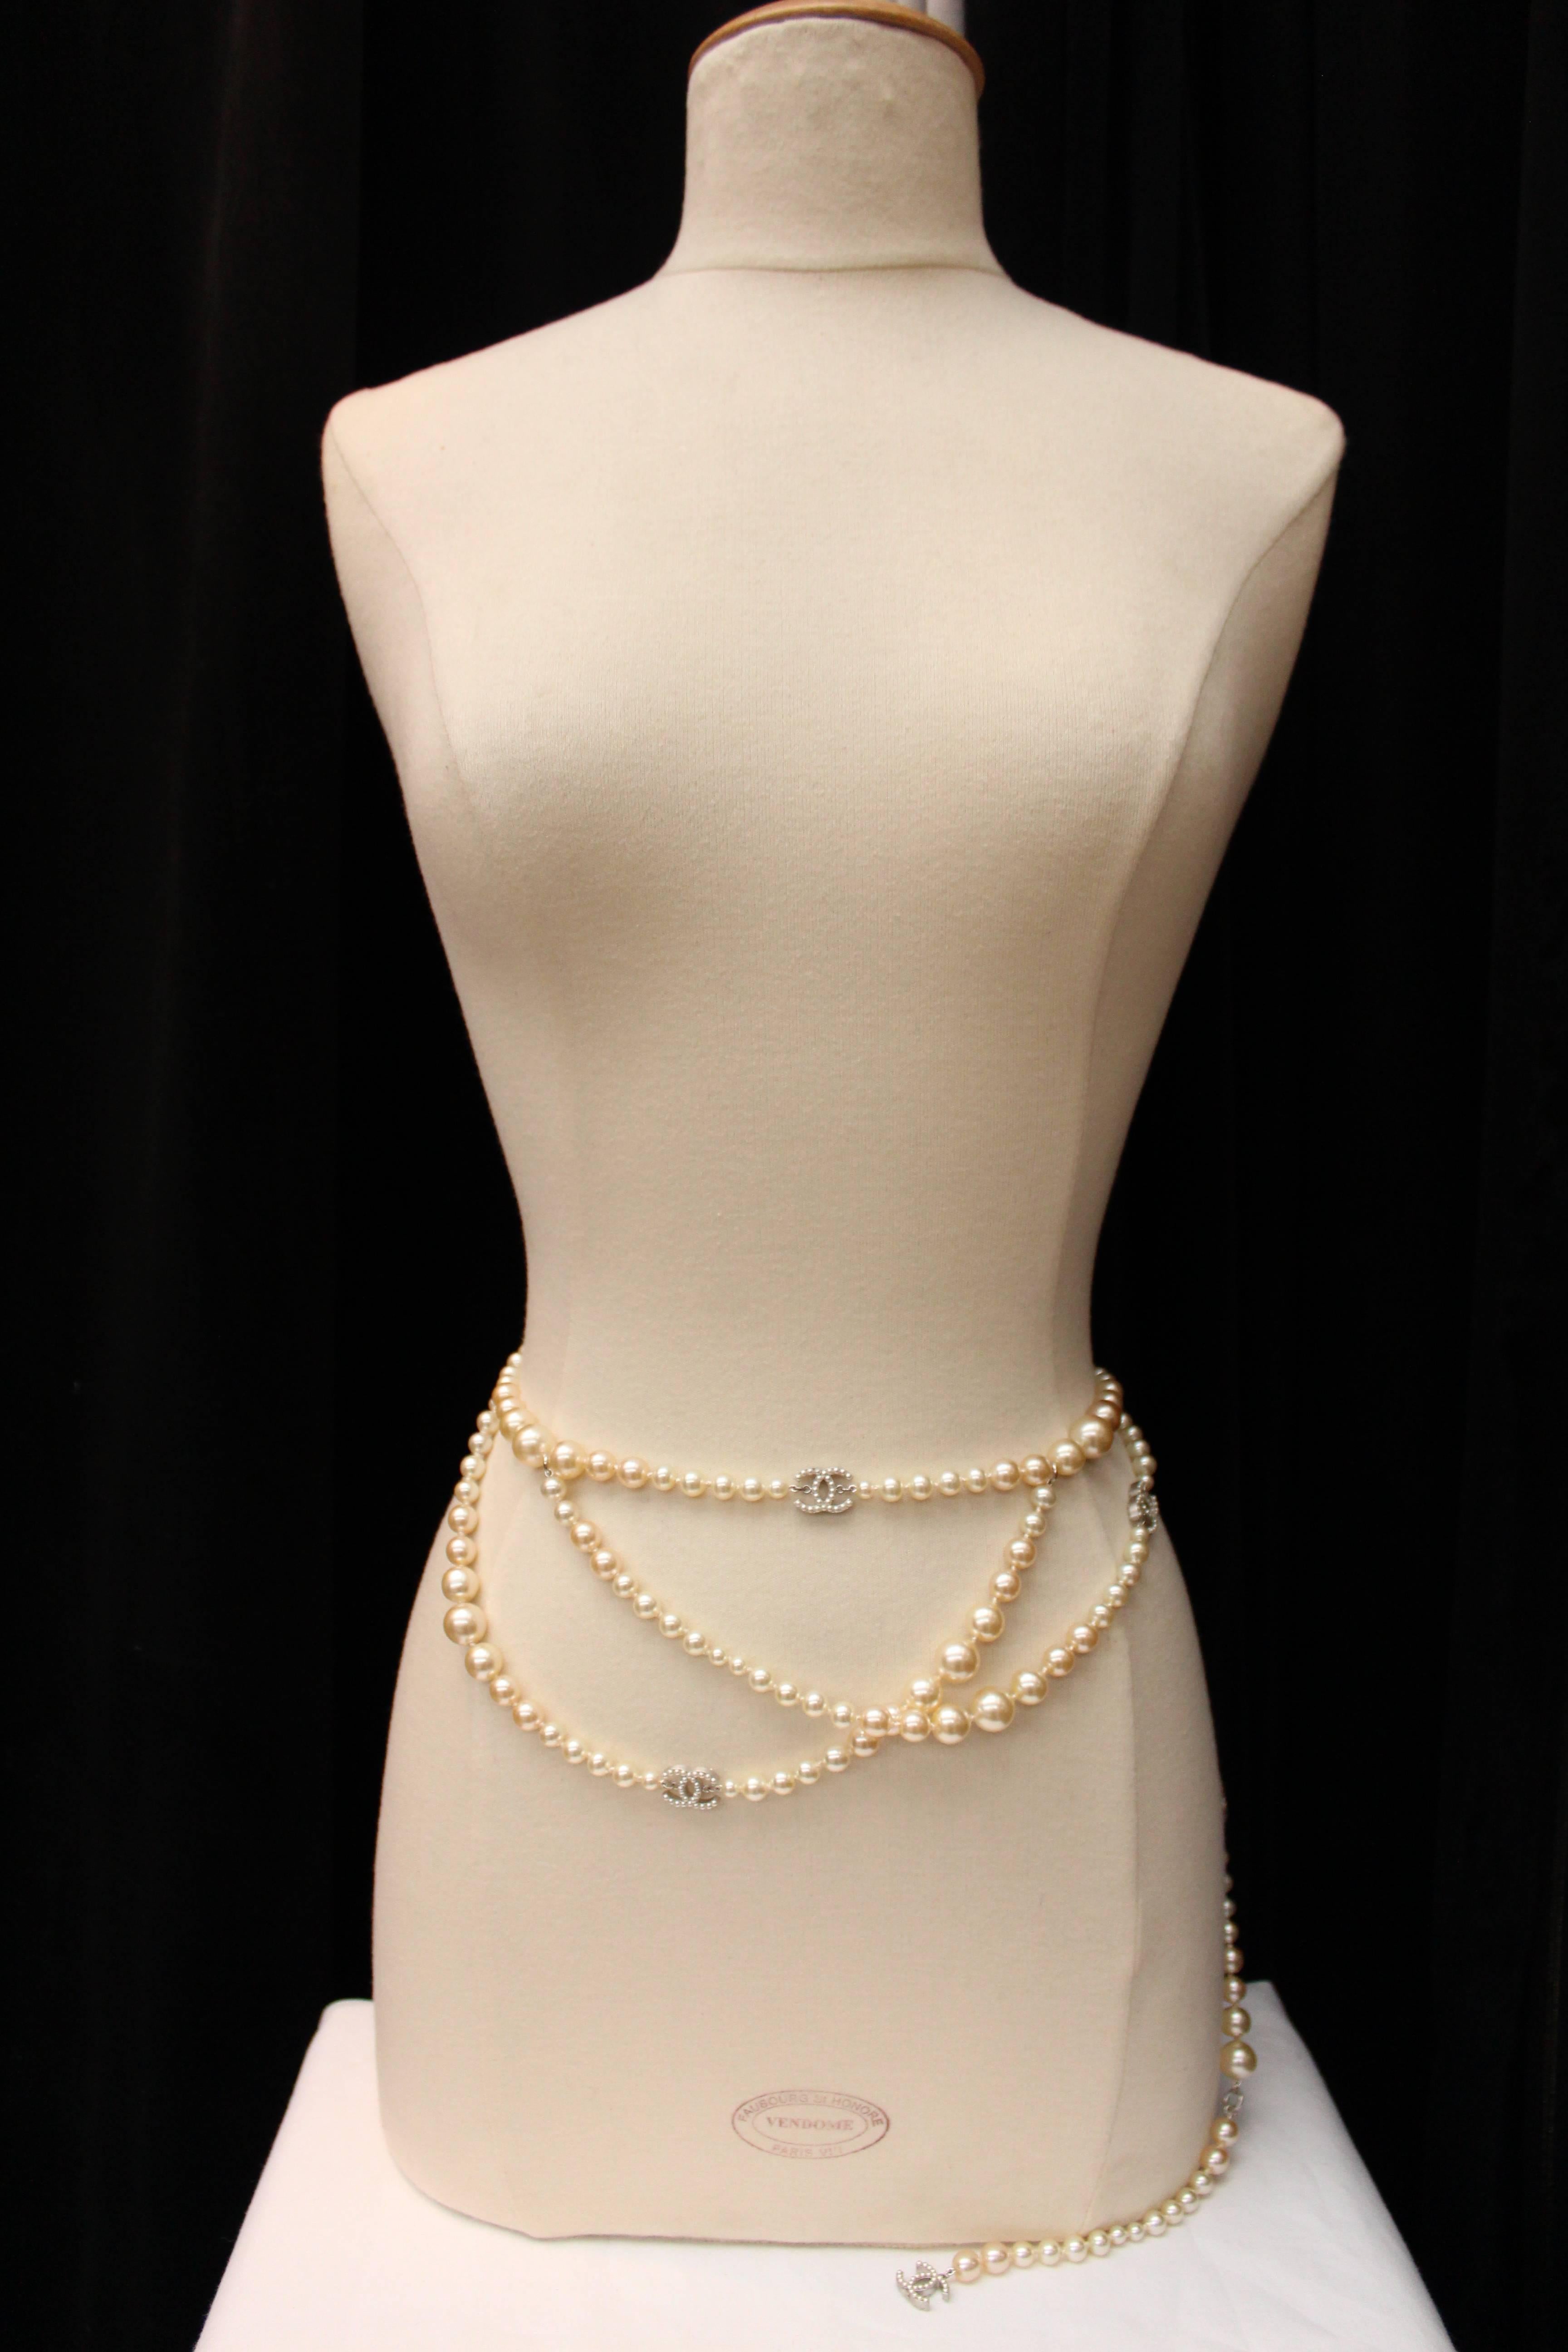 CHANEL (Made in France) Belt that can be worn as a necklace comprising of several rows of faux pearls of different sizes and different shades of mother-of pearls alternated with five gilt metal CC logos paved with mother-of-pearl very small